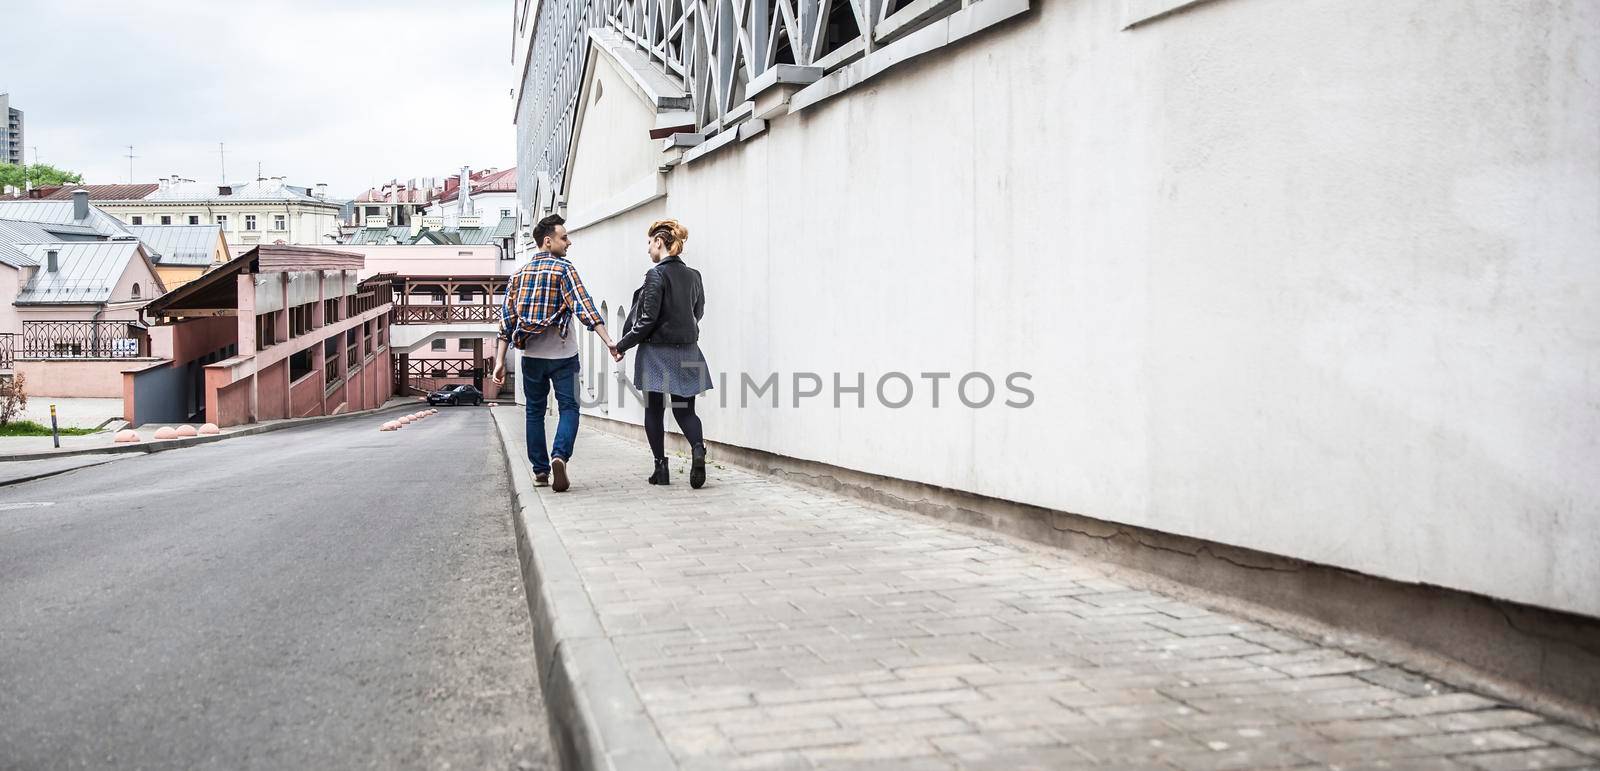 photographer takes photos of a couple in love walking down the street by SmartPhotoLab